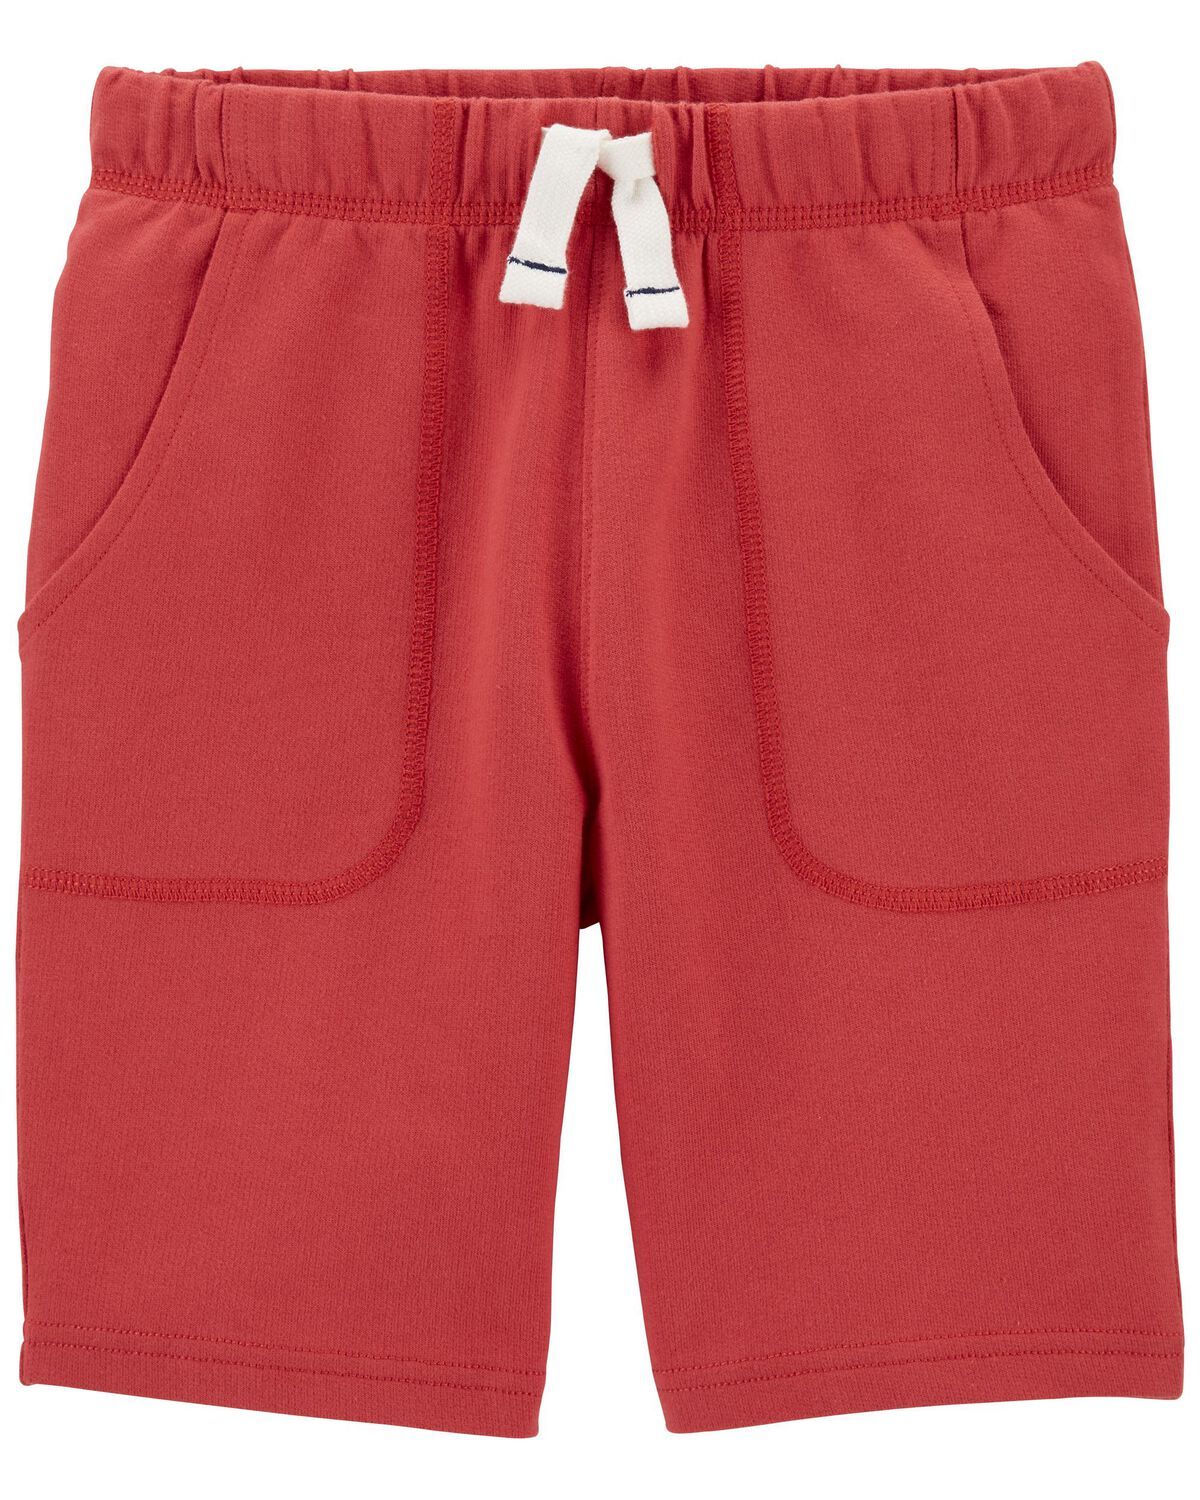 Red Kid Pull-On Knit French Terry Shorts | carters.com | Carter's